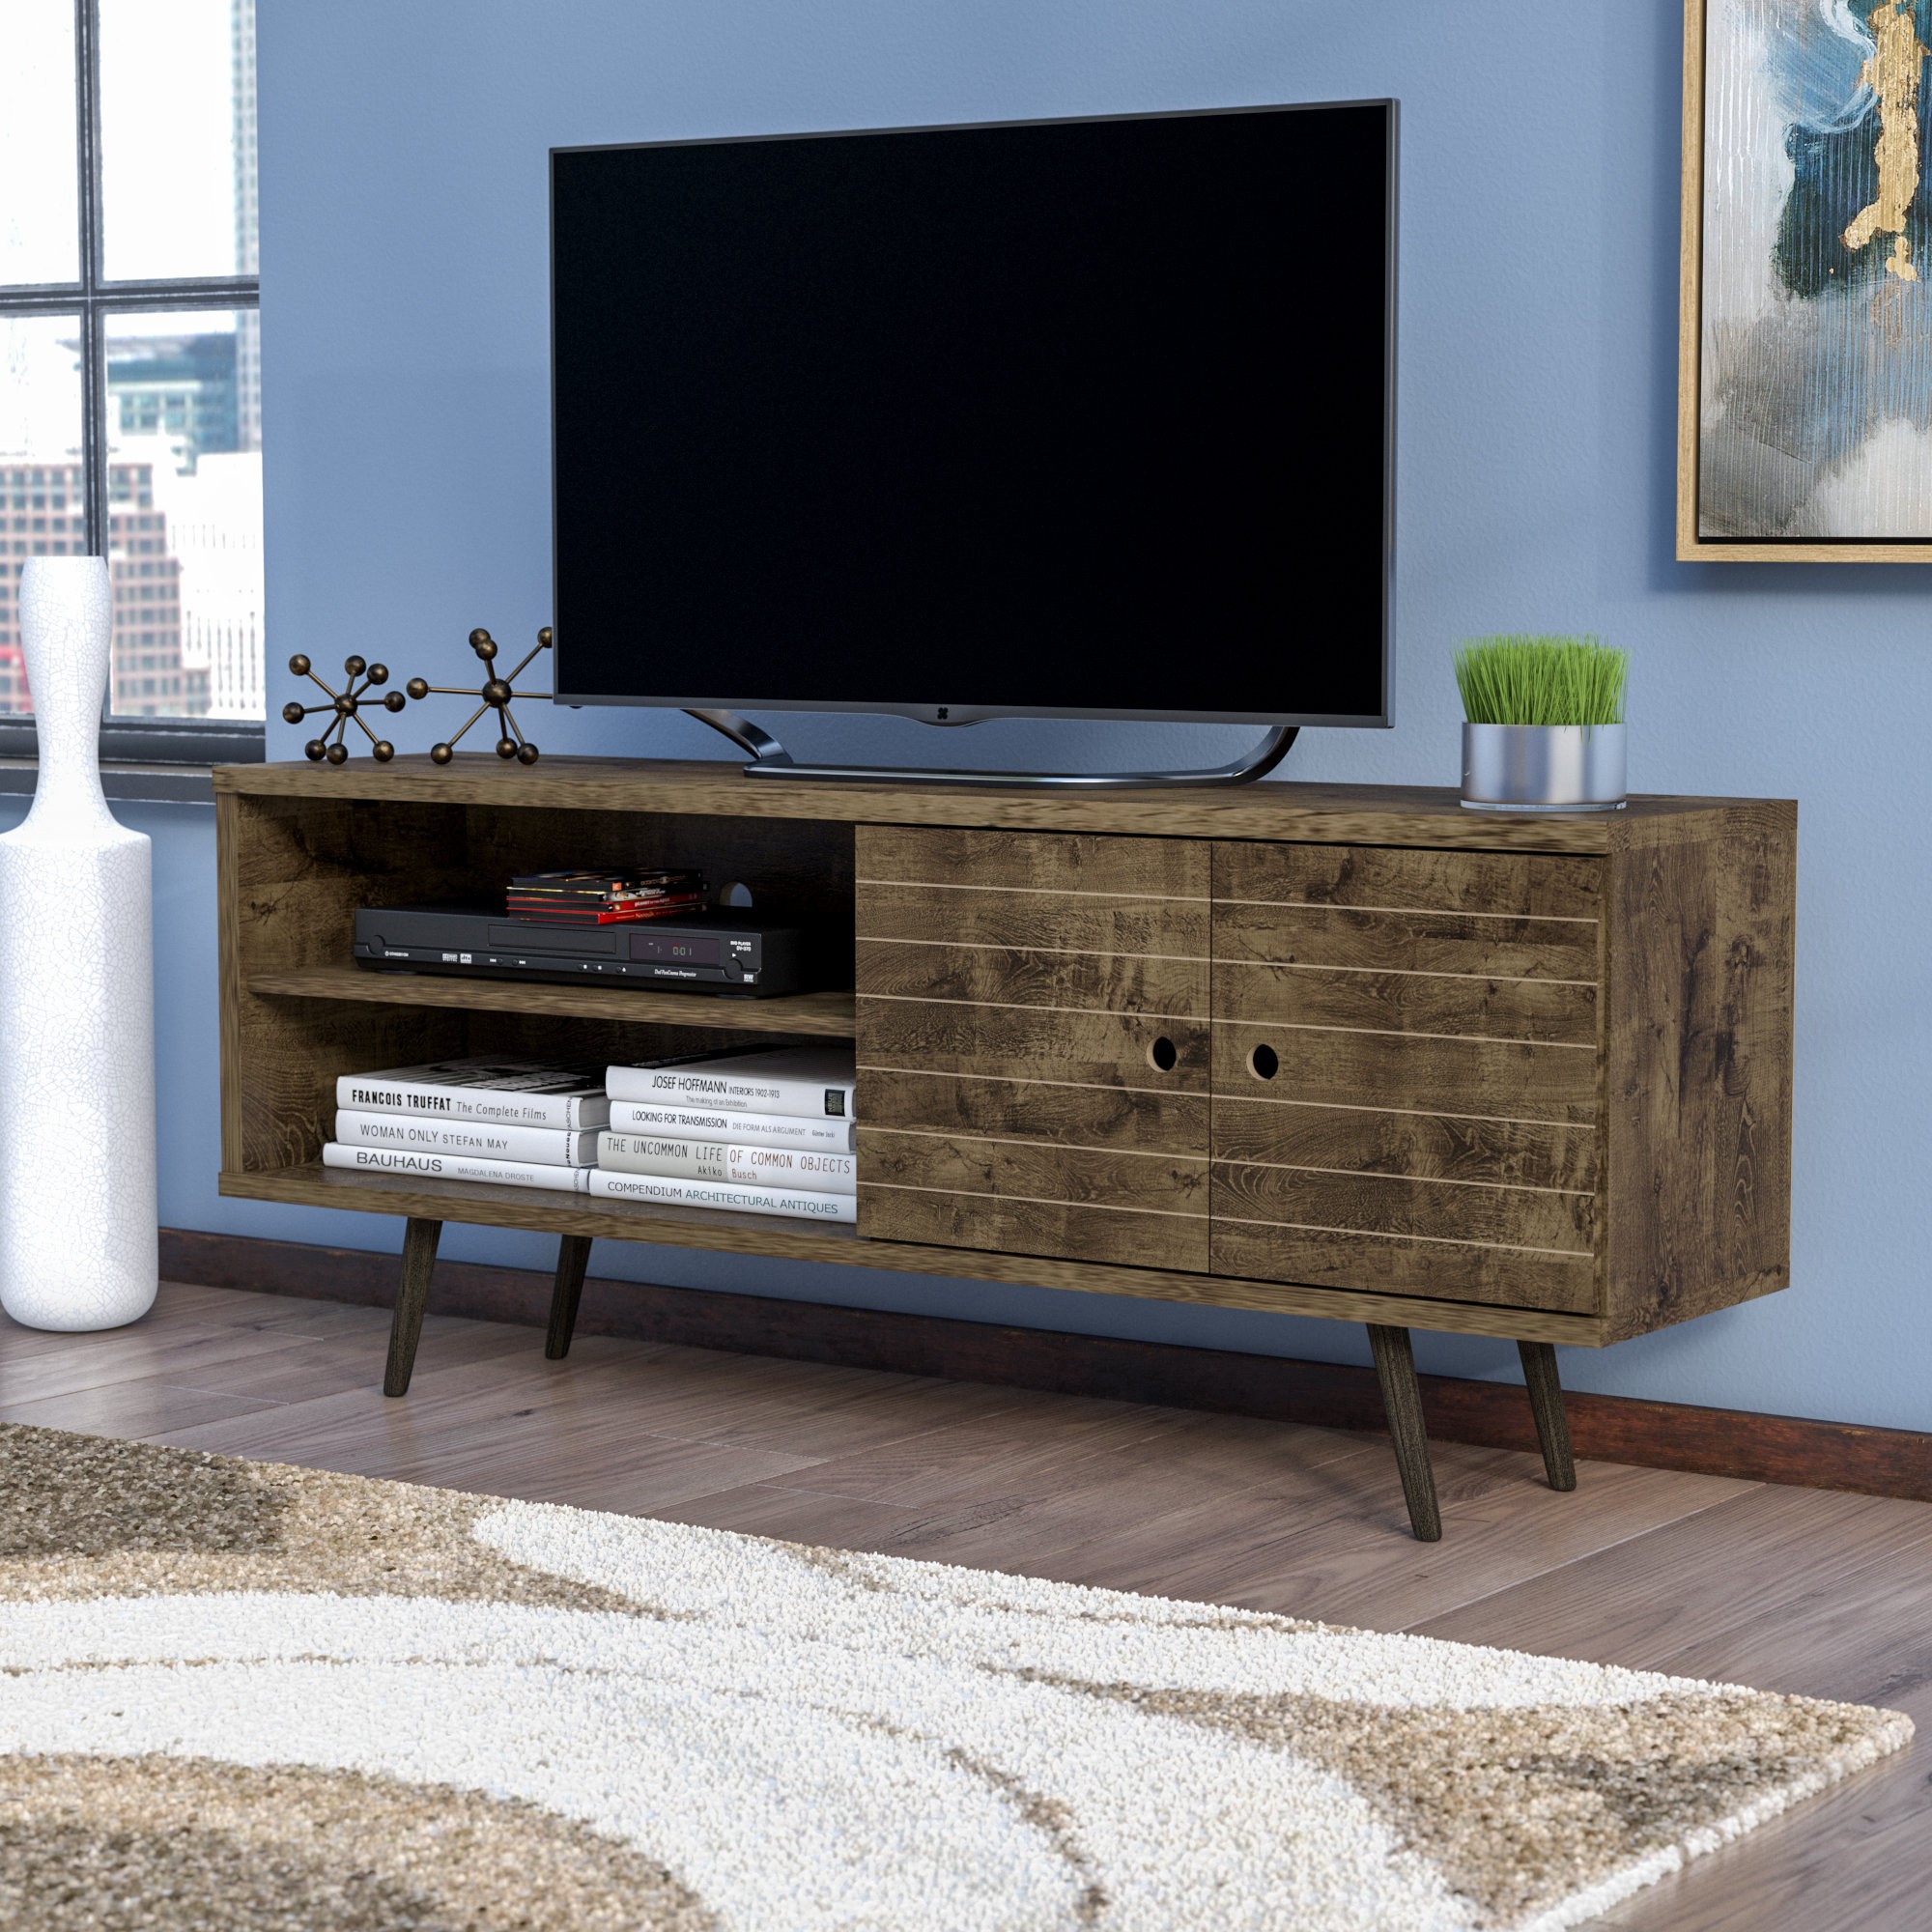 Hal TV Stand for TVs up to 60 inches